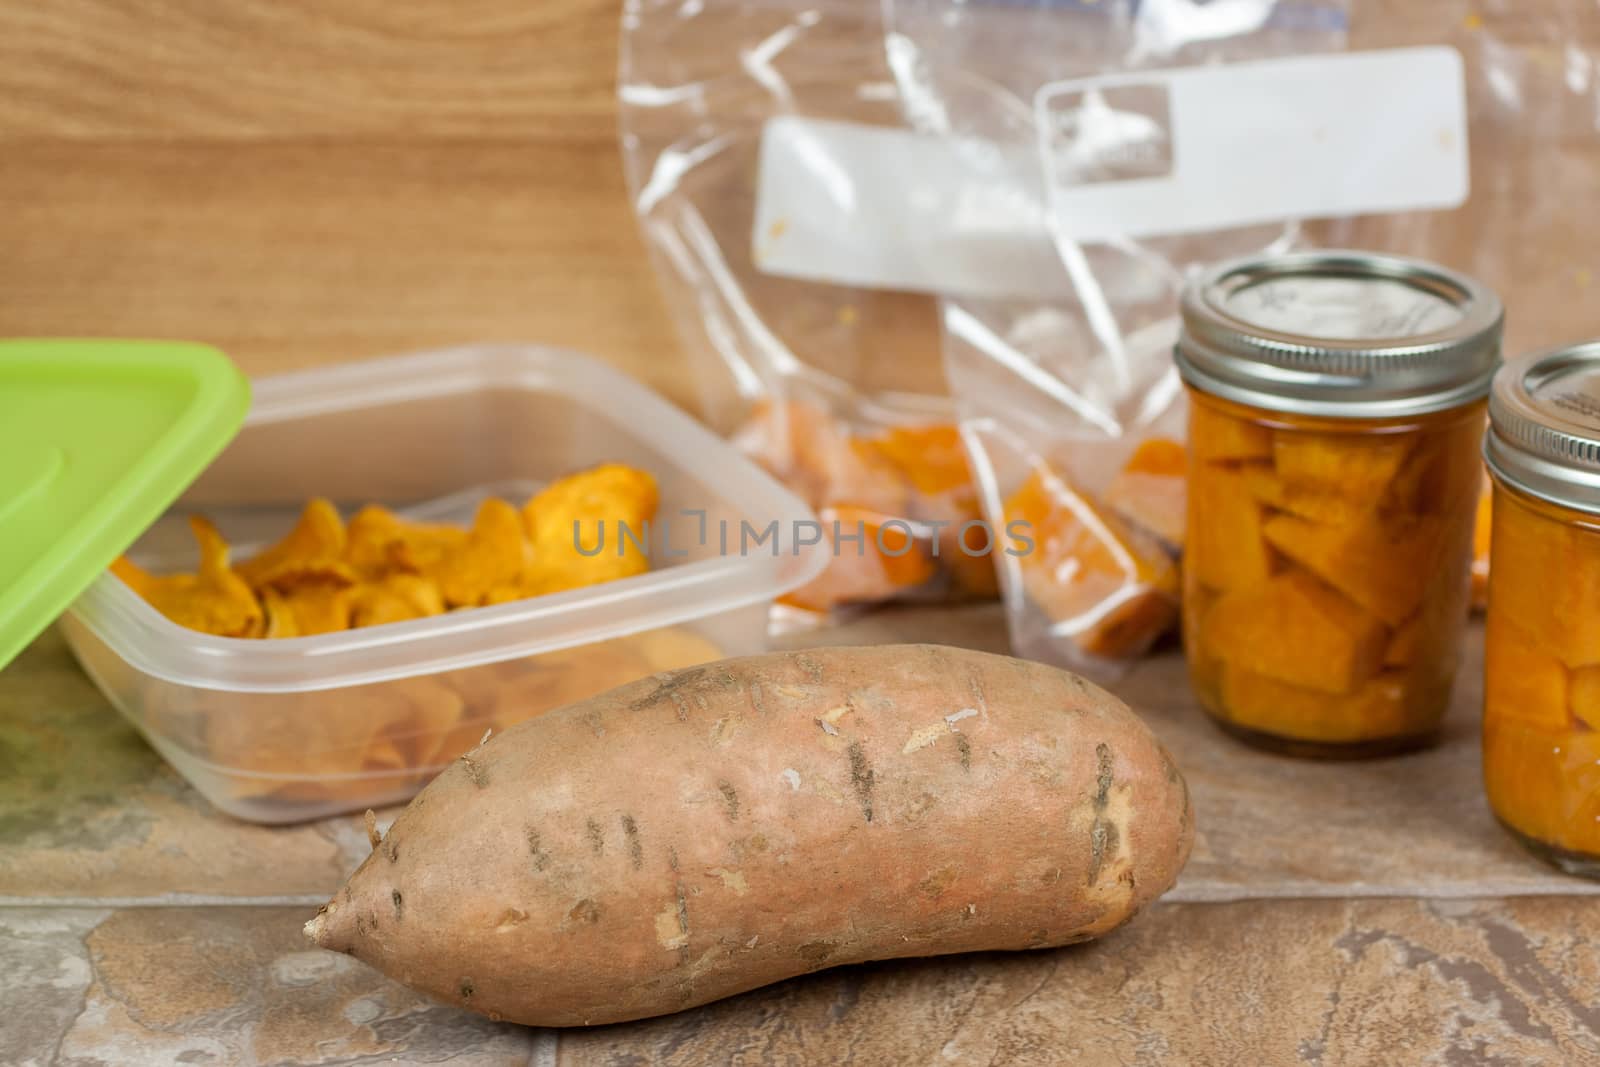 Sweet potatoes canned, dried, and ready for the freezer.